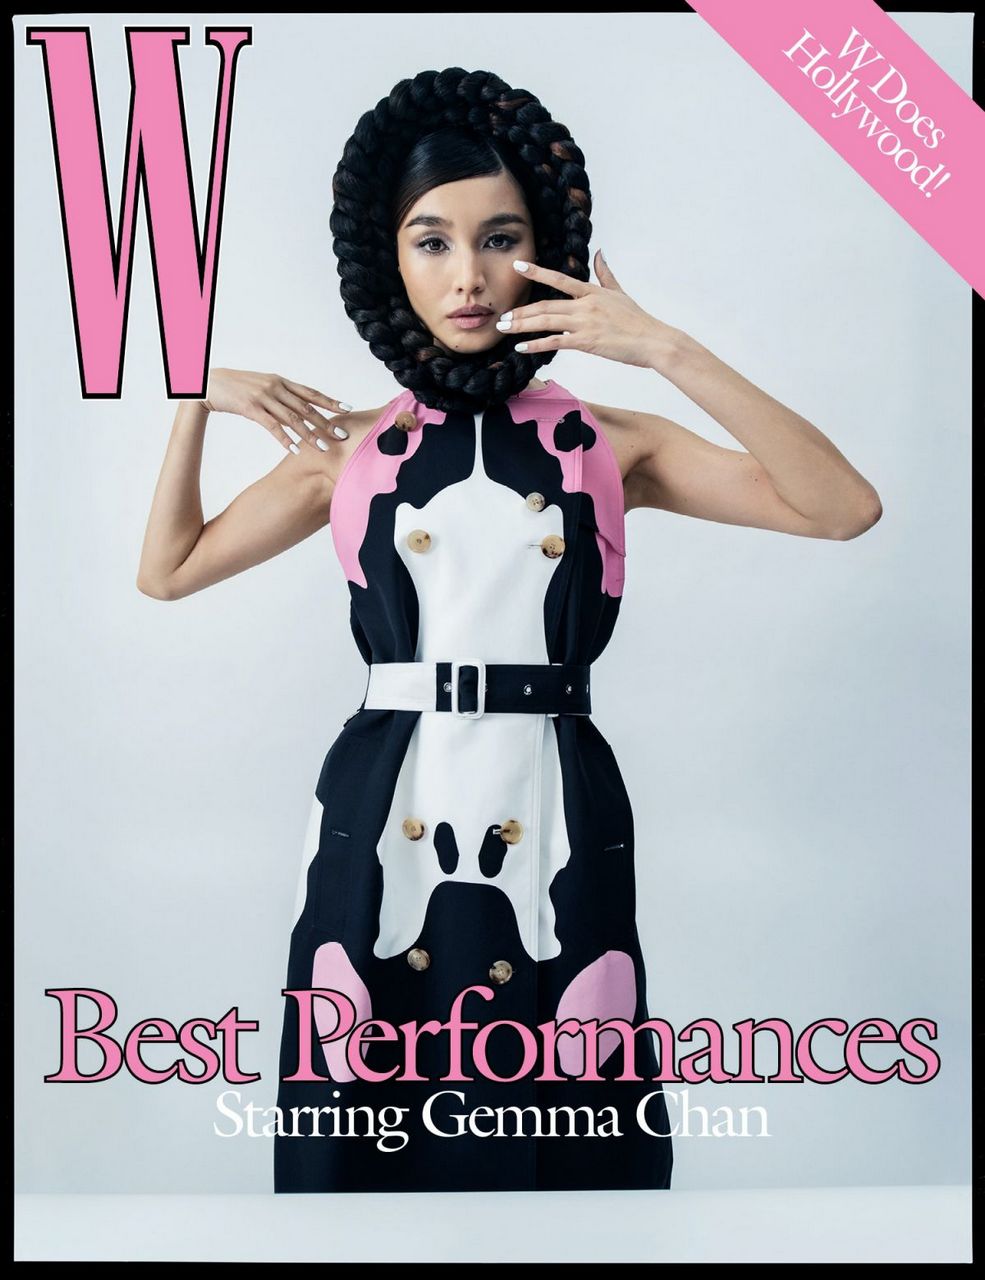 Gemma Chan For W Magazine Best Performance Issue January